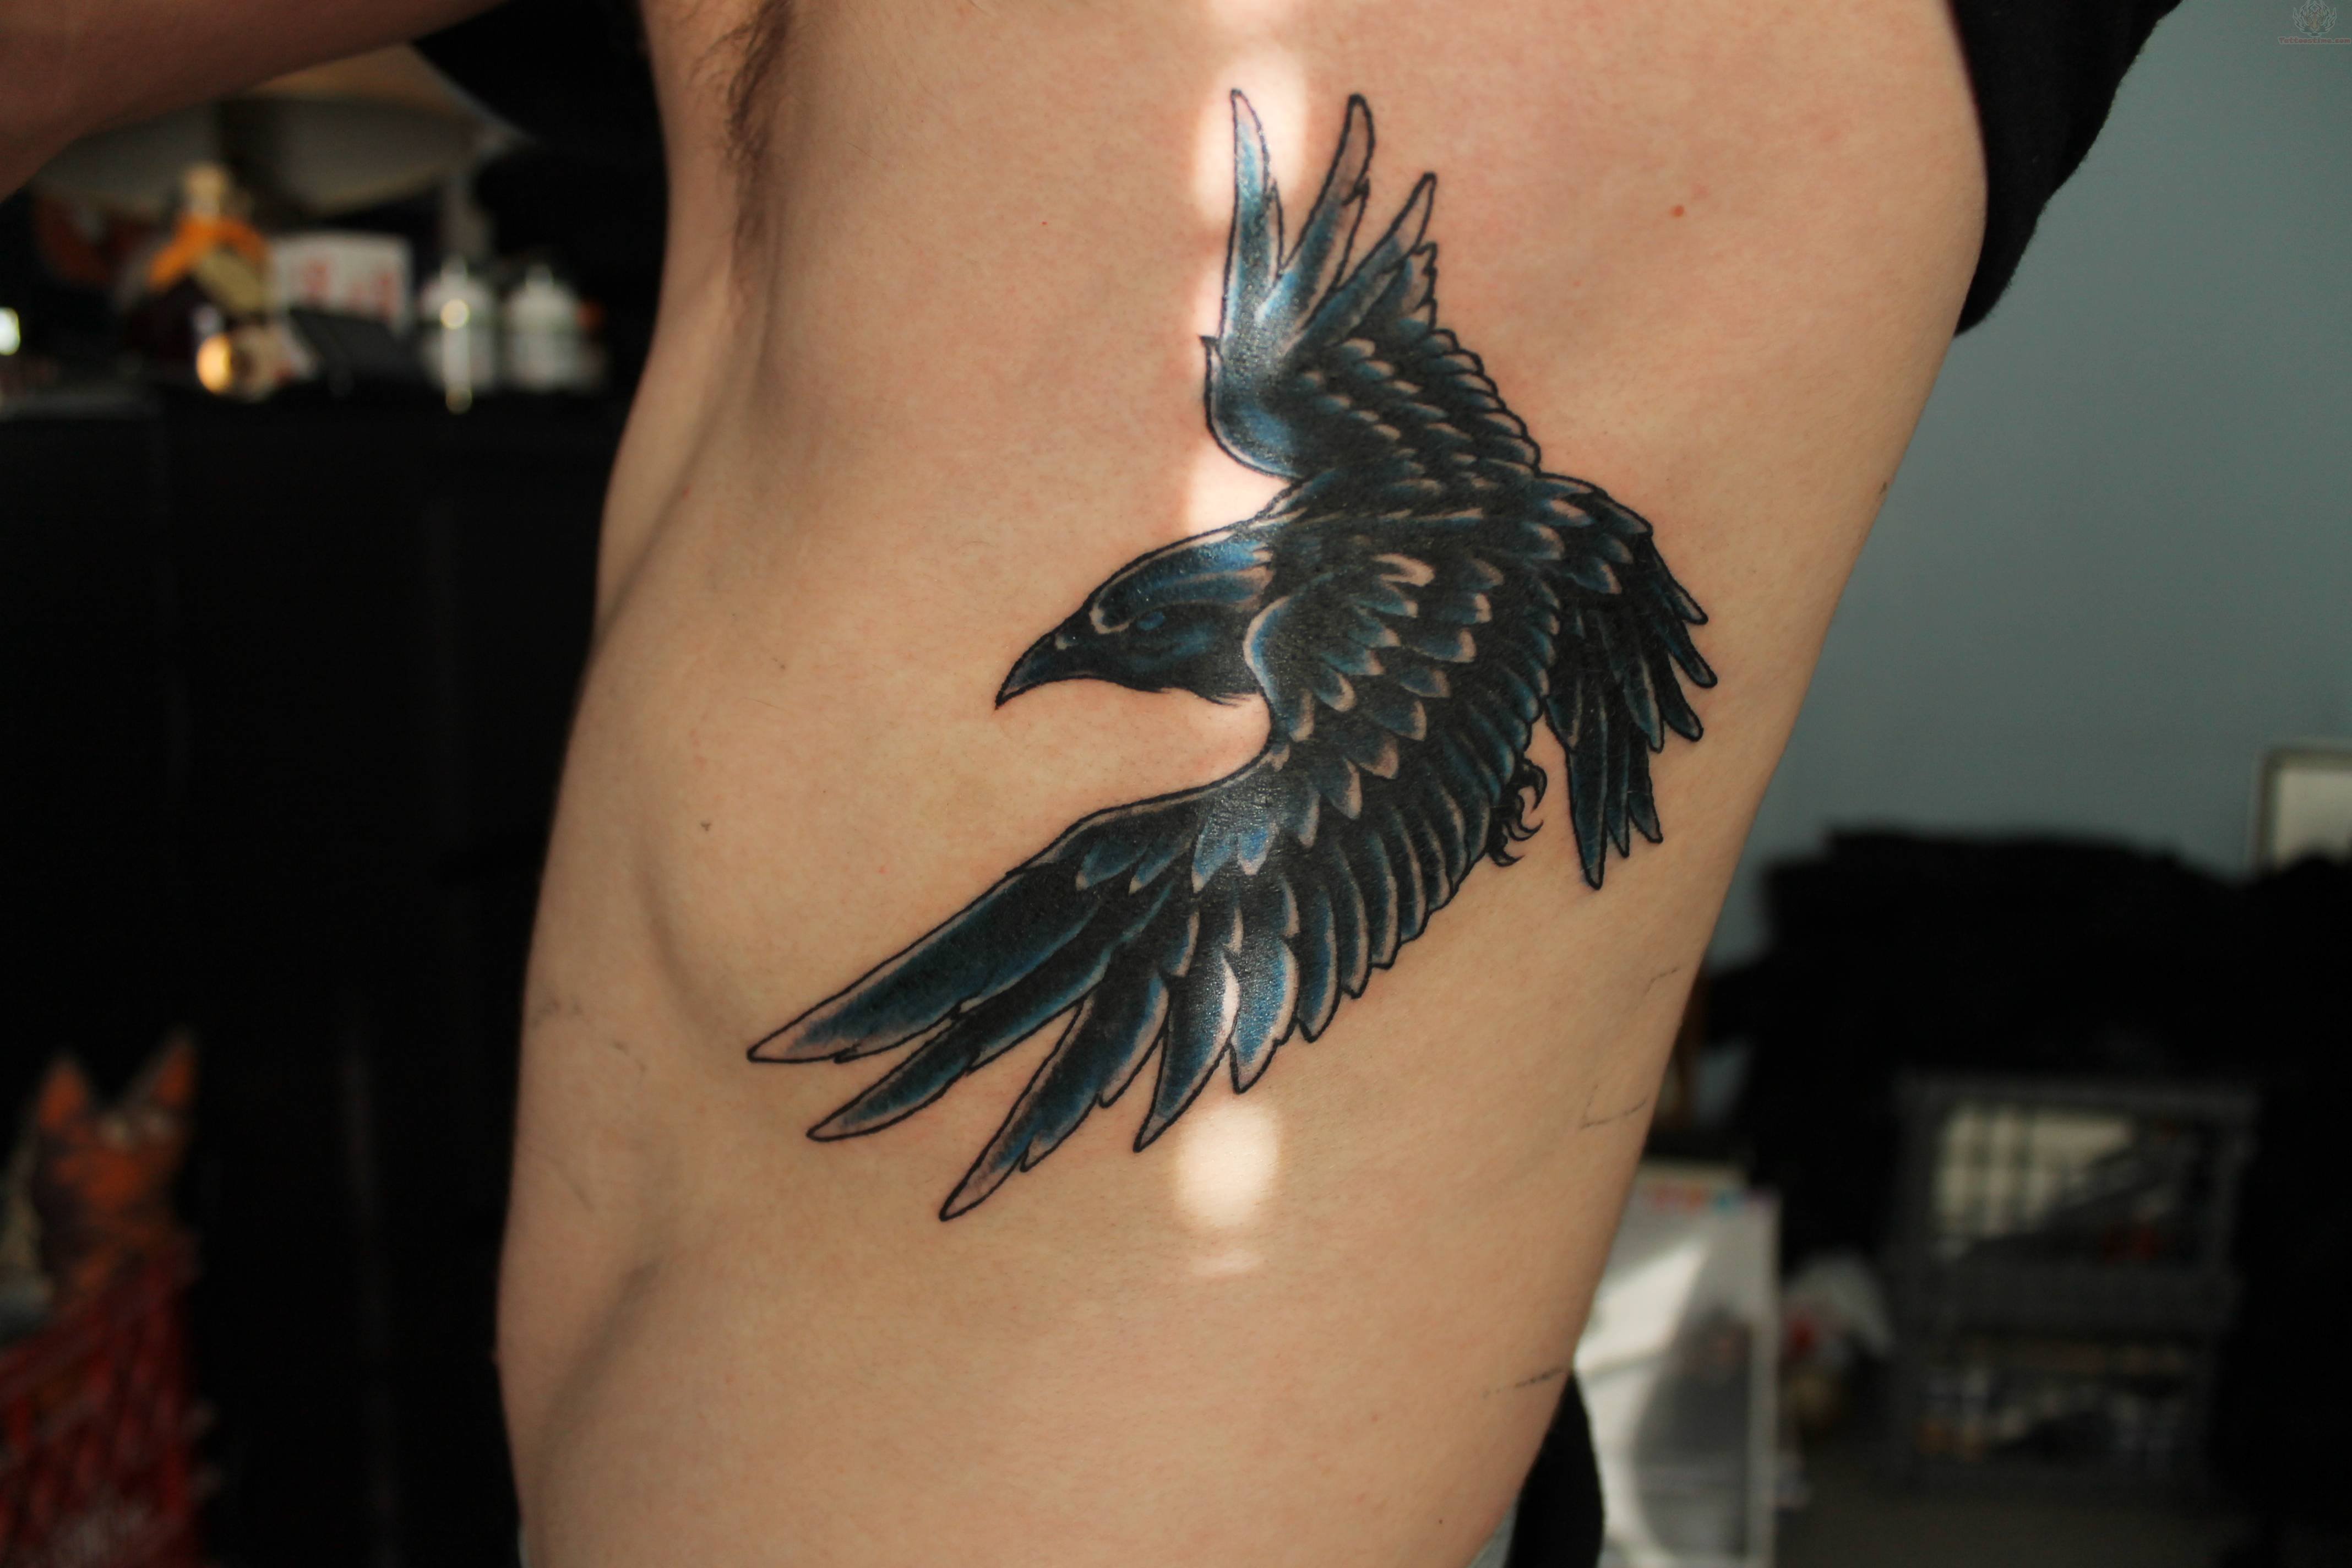 Skull and Raven Tattoo Meaning - wide 3